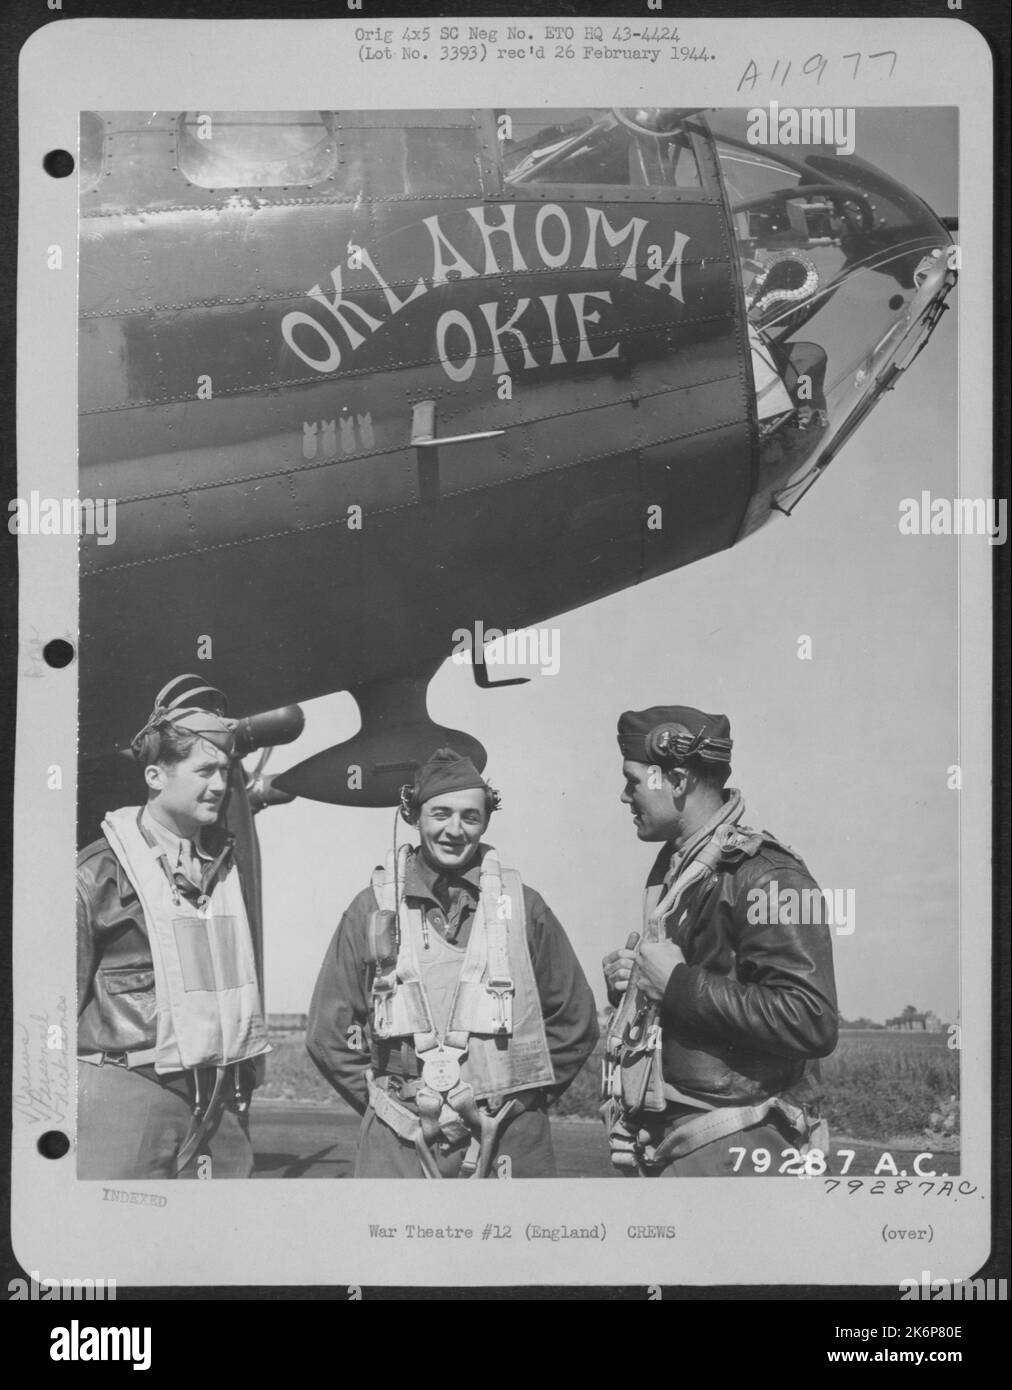 1St Lt. James Lundy Of Cedar Rapids, Iowa, Bombardier; S/Sgt. Elmer L. Frederick Of Norwalk, Connecticut, Waist Gunner; And 2Nd Lt. Winfield Scovell Of Portland, Connecticut, Navigator, All Members Of The Flight Crew Of The Boeing B-17 'Oklahoma Okie', Ar Stock Photo